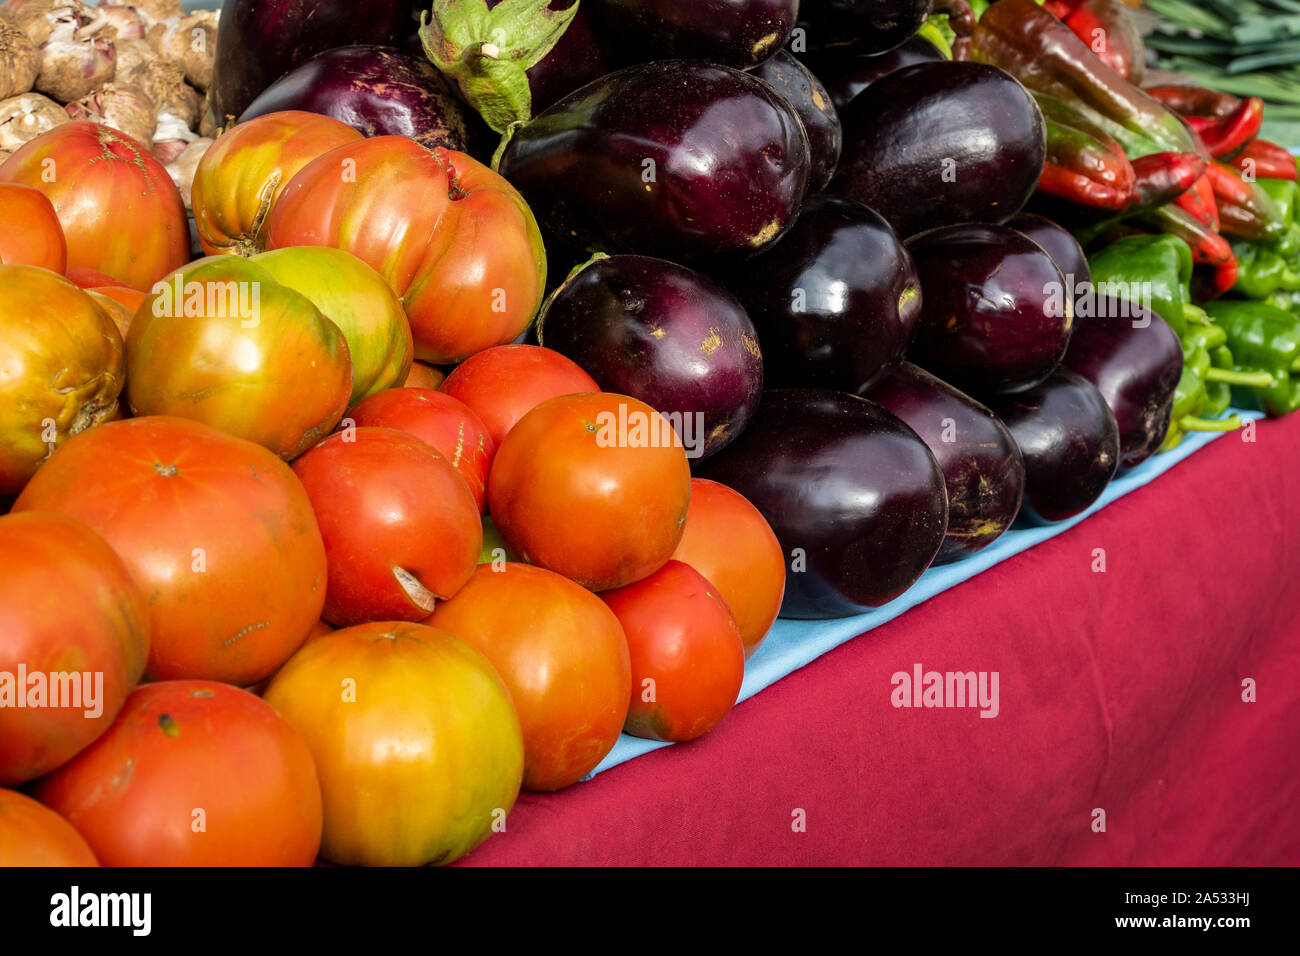 Vegetables in the local organic products market Stock Photo